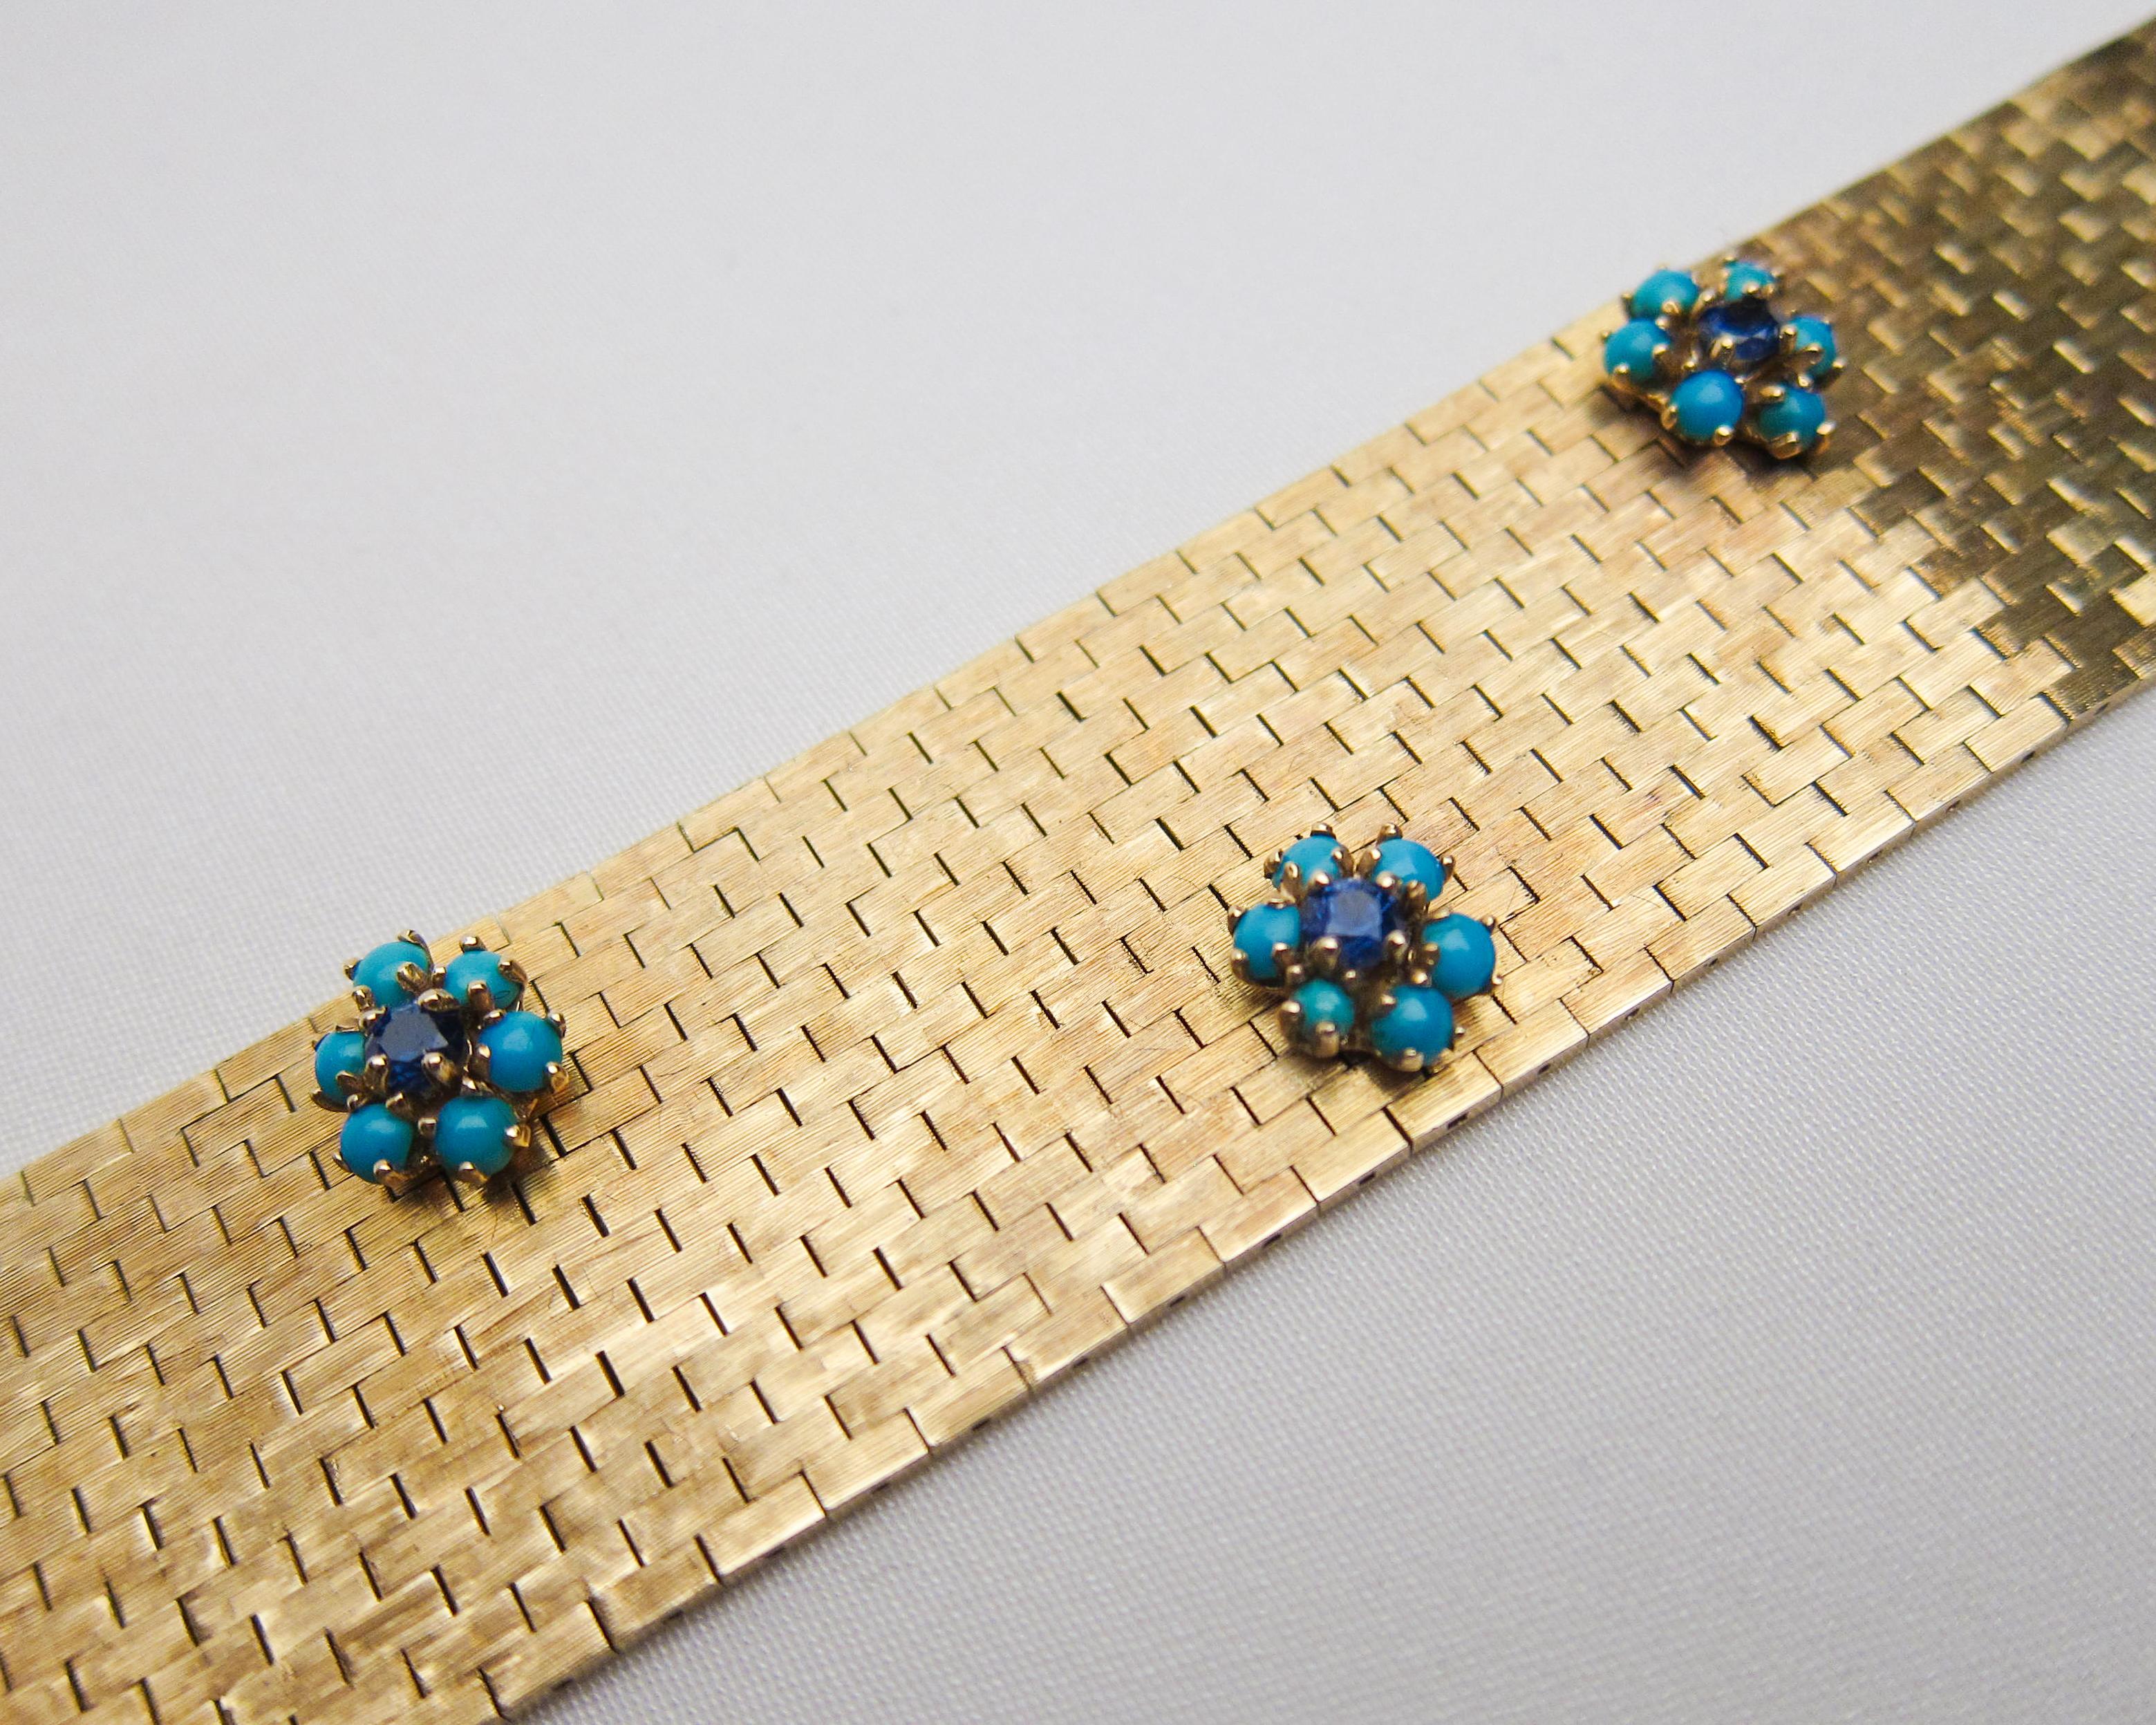 Circa 1940. This fabulous 14KT yellow gold Retro Era brick link bracelet is accented with six cluster settings of turquoise and sapphire. The six mixed-cut natural blue sapphires weigh 1.02 carats total. The 36 Persian turquoise cabochons weigh 2.52